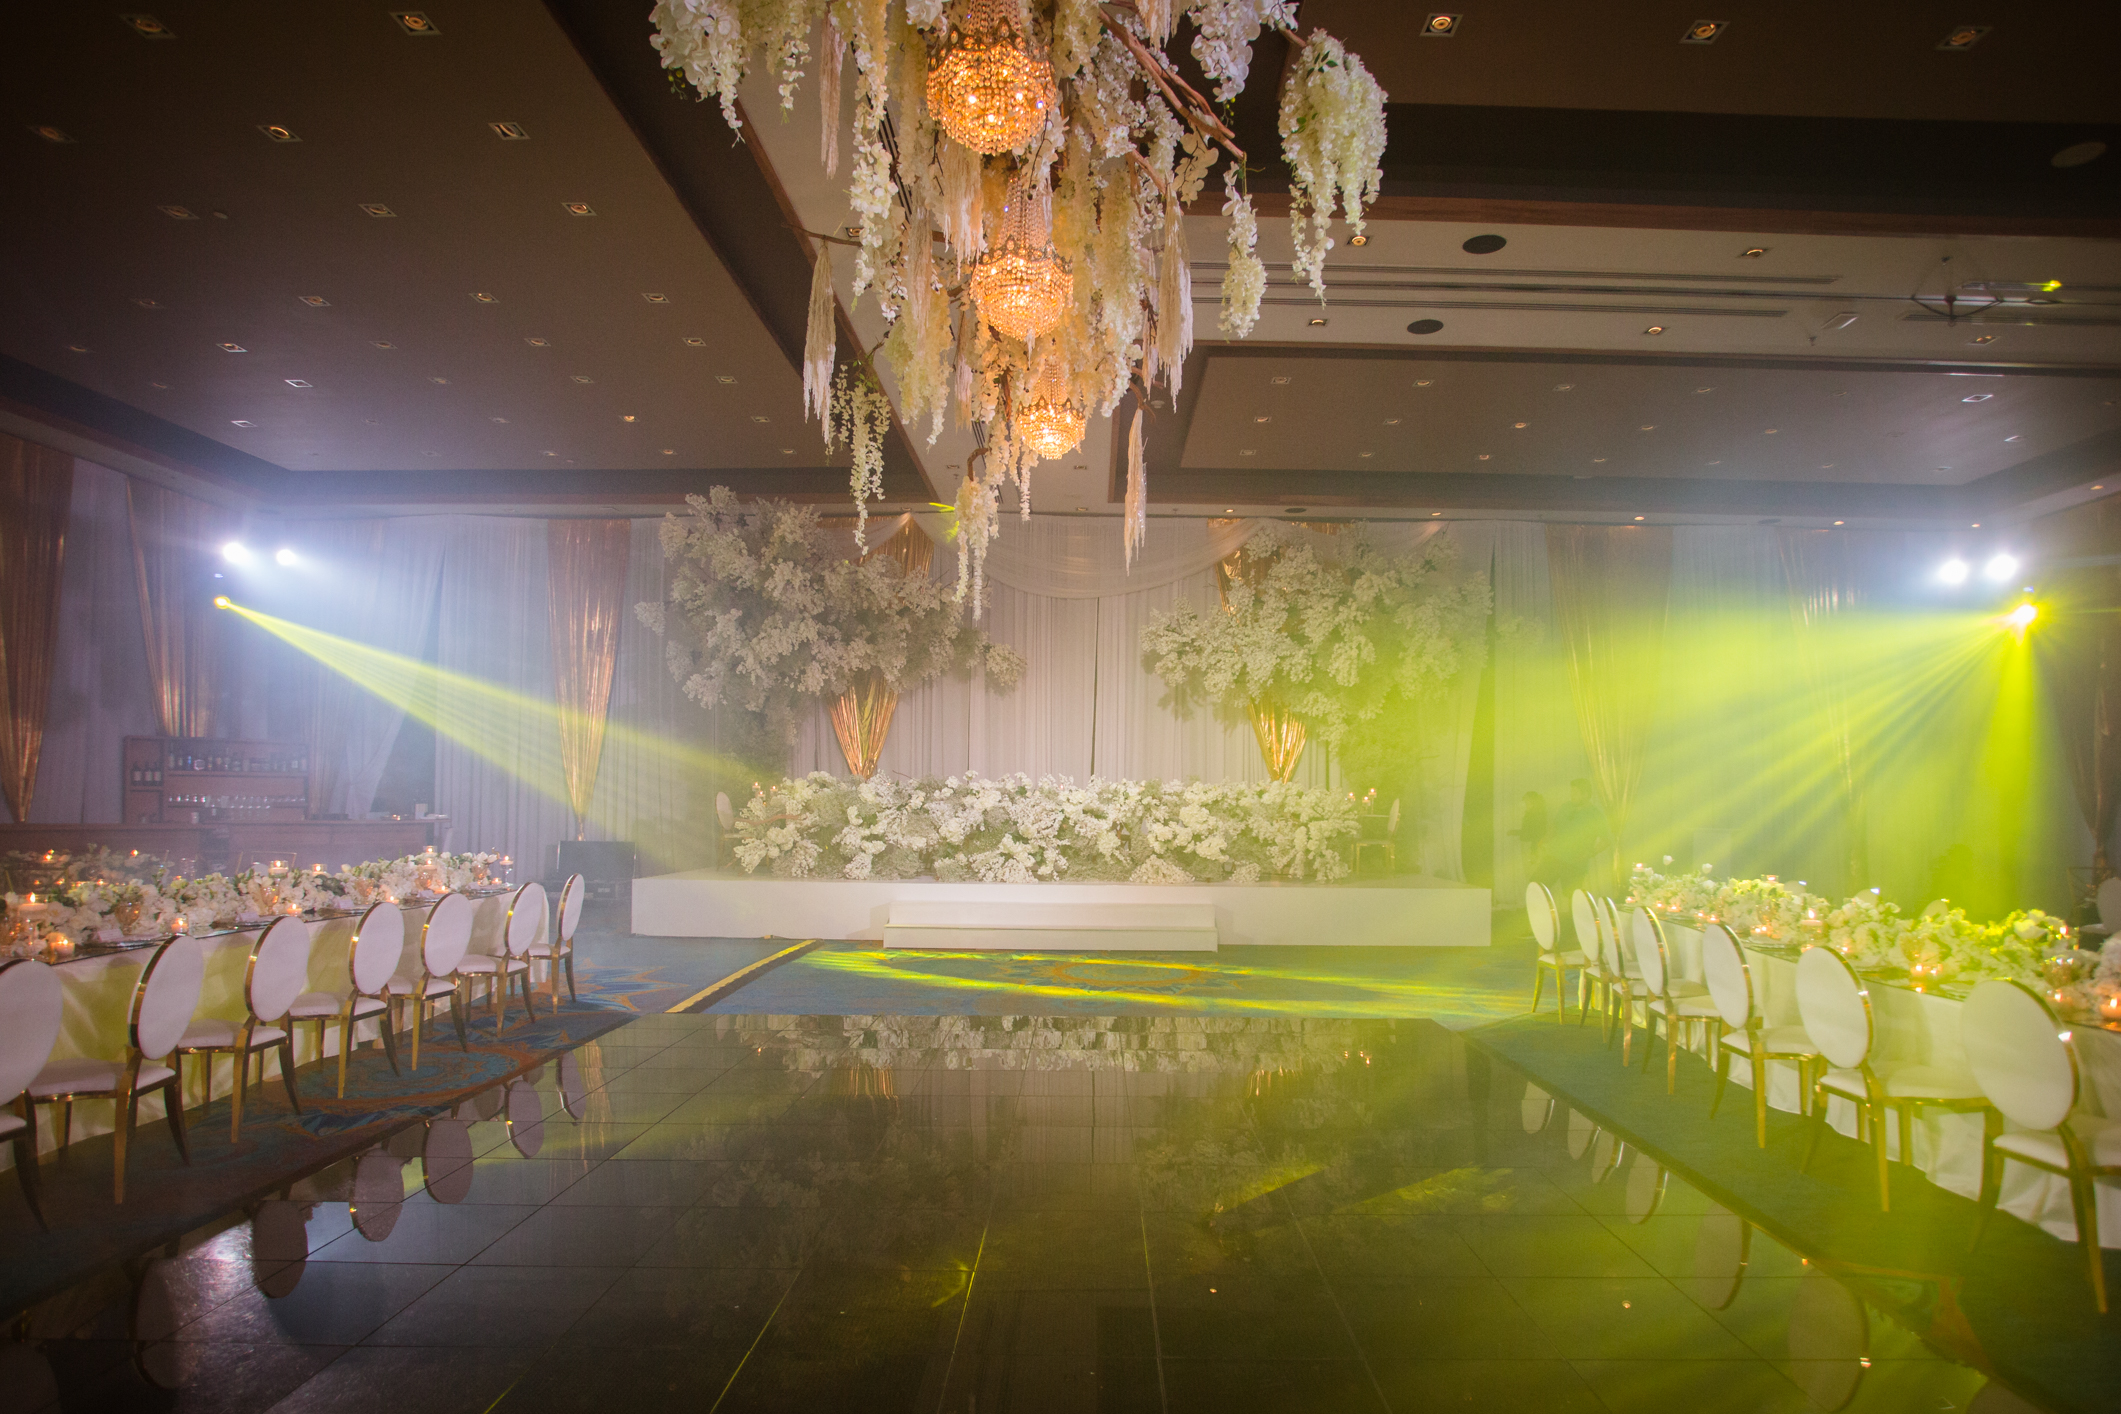 Expansive reception space adorned with white blooms, candles, and yellow party lights for weddings.